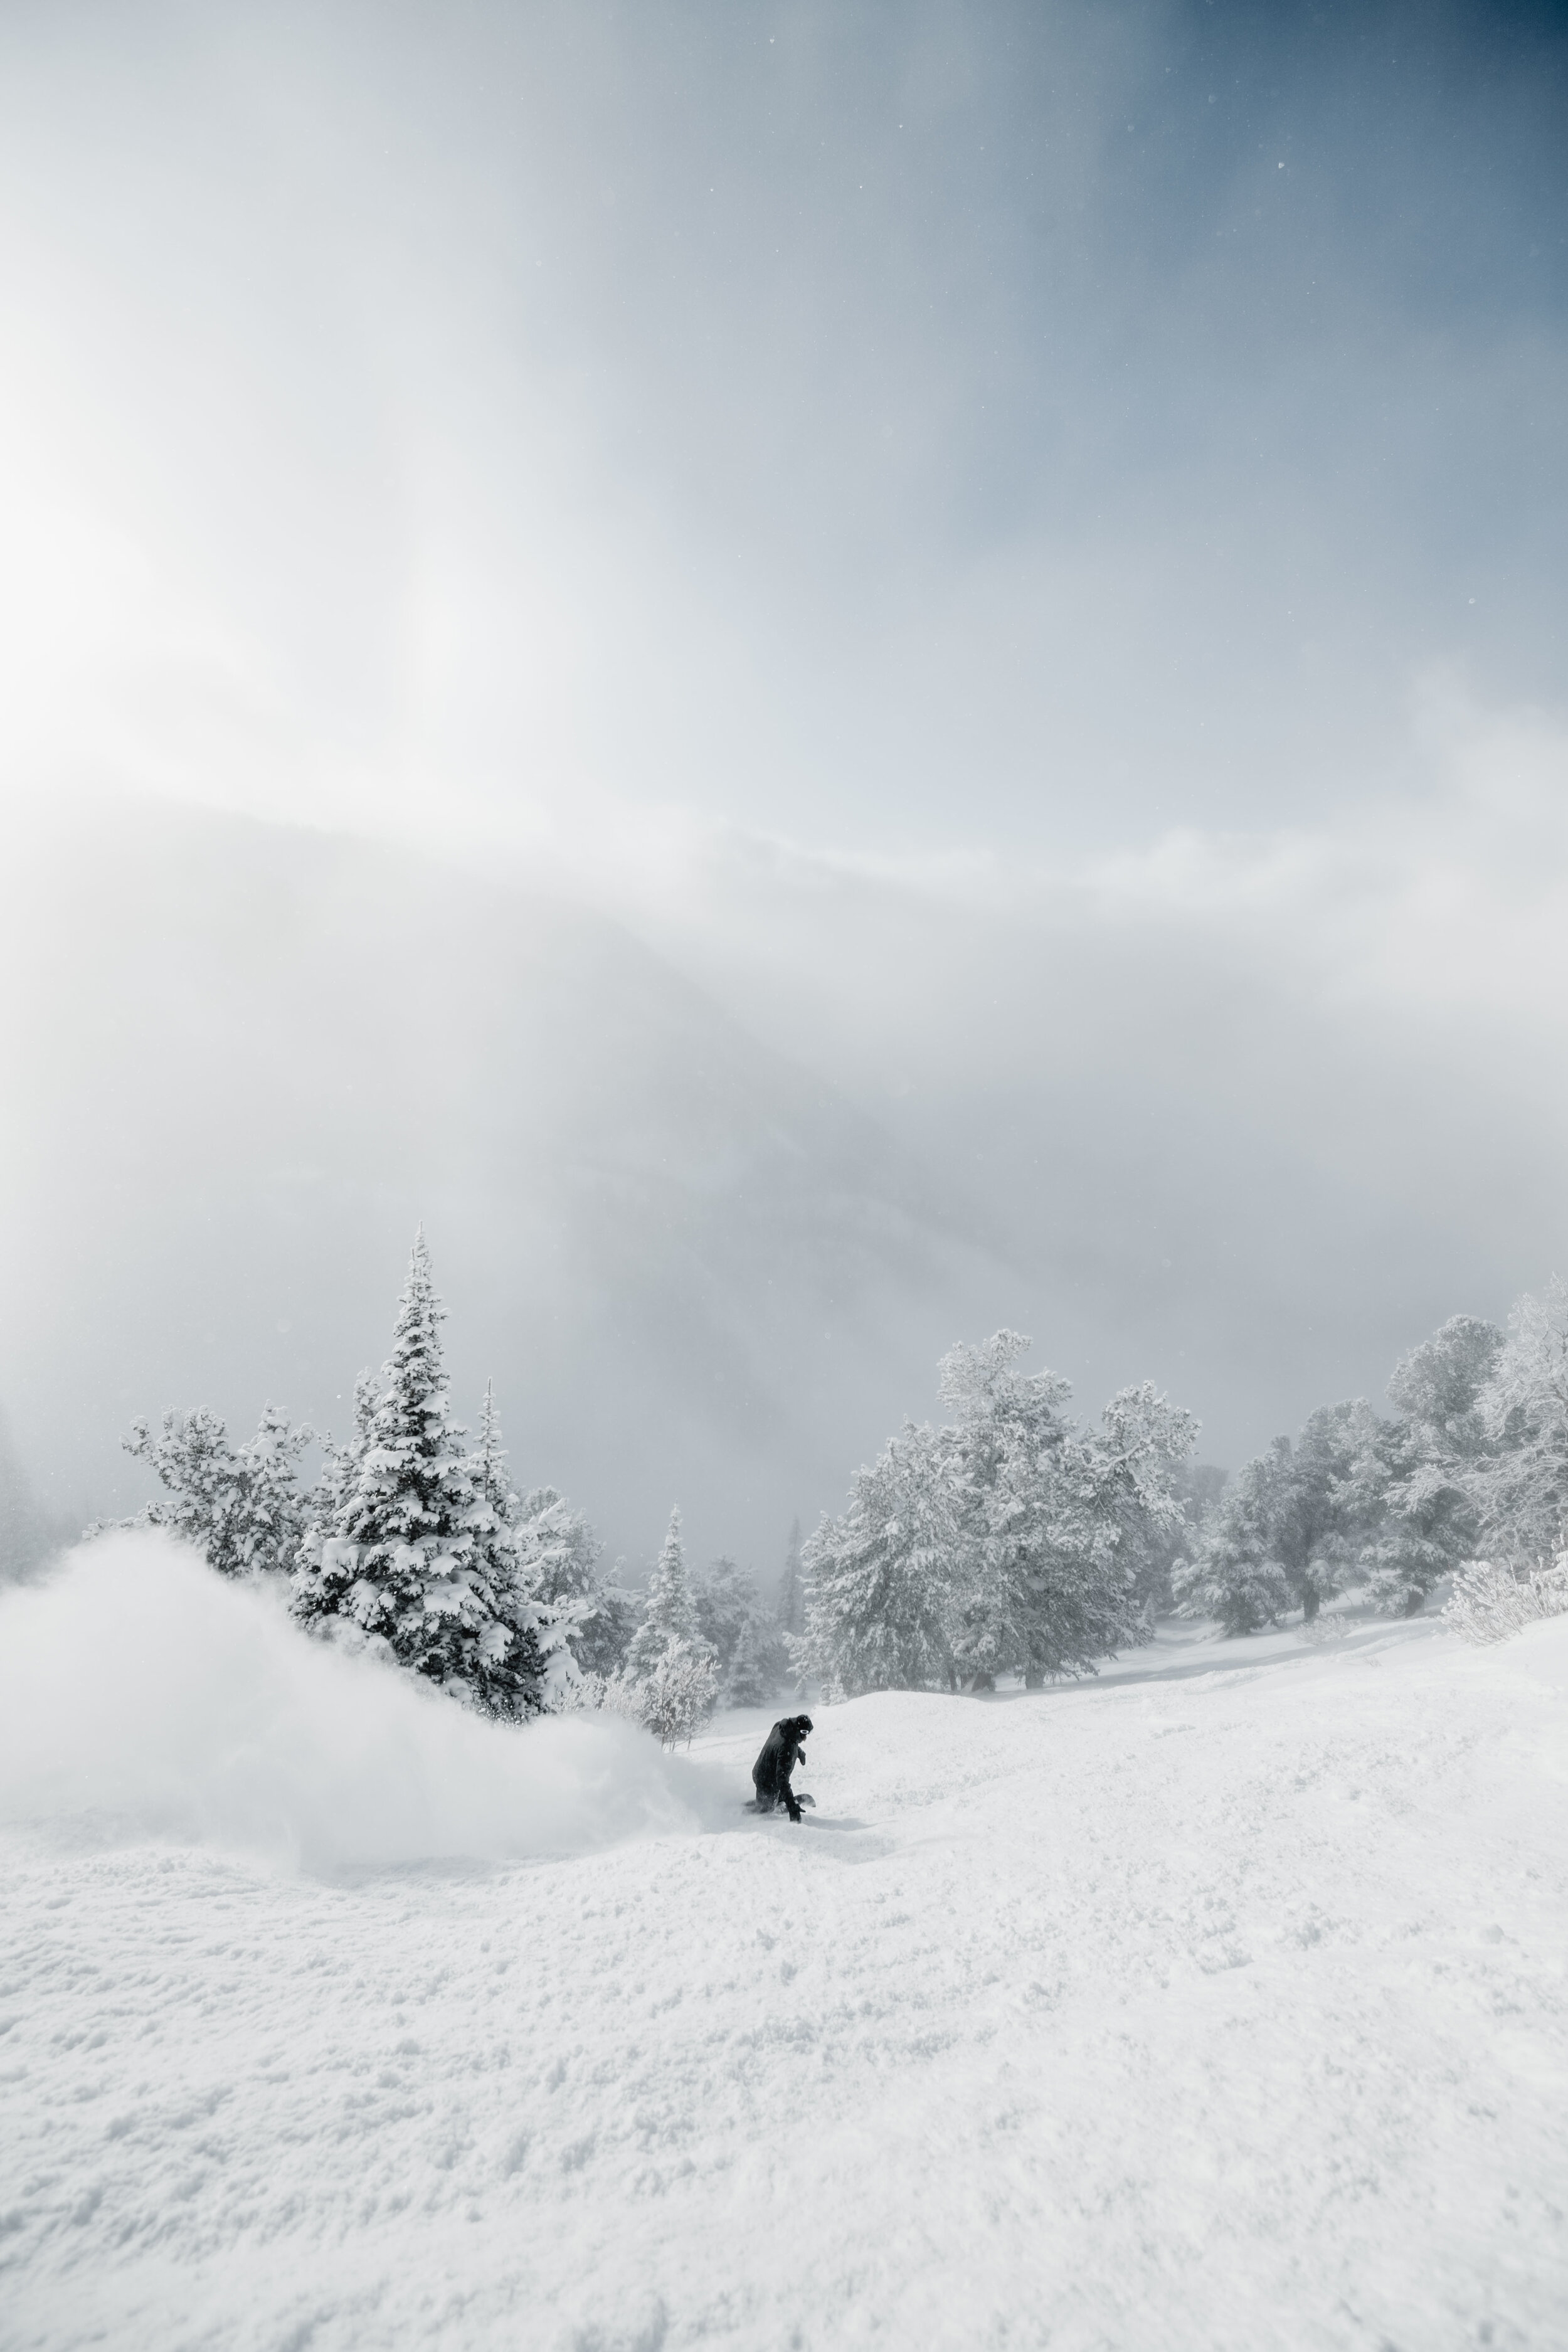   Backcountry Gear &amp; Apparel Winter ’19    Pursuits:  Helicopter Skiing, Backcountry Skiing, and Resort Skiing      Location : Little Cottonwood Canyon, UT    Producer : Tyler Arrivillaga   Photographers : Re Wikstrom &amp; Ben Christensen 